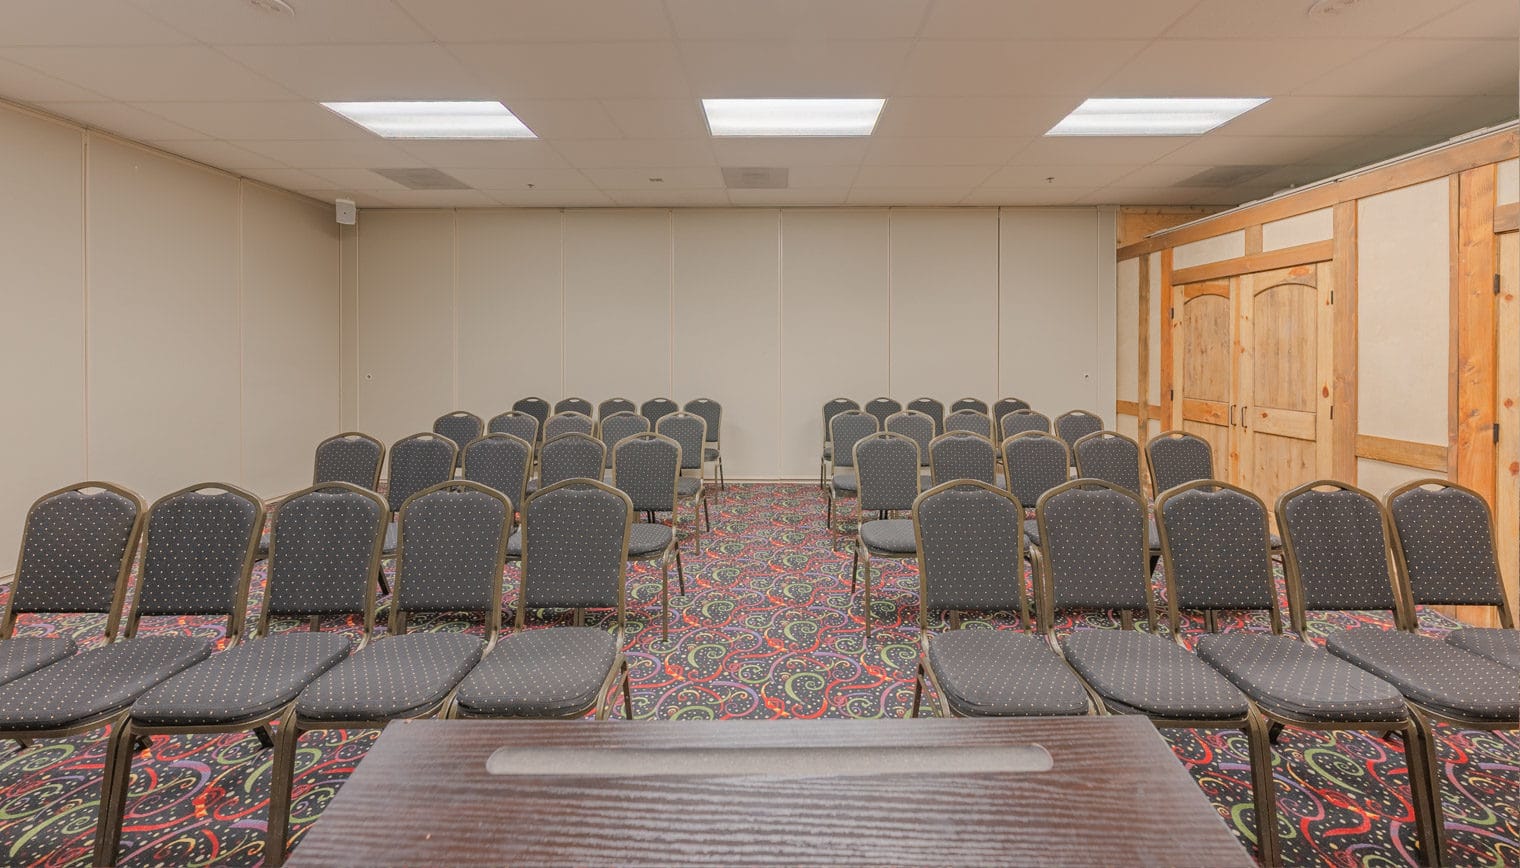 Shasta meeting space facing rows of seats.